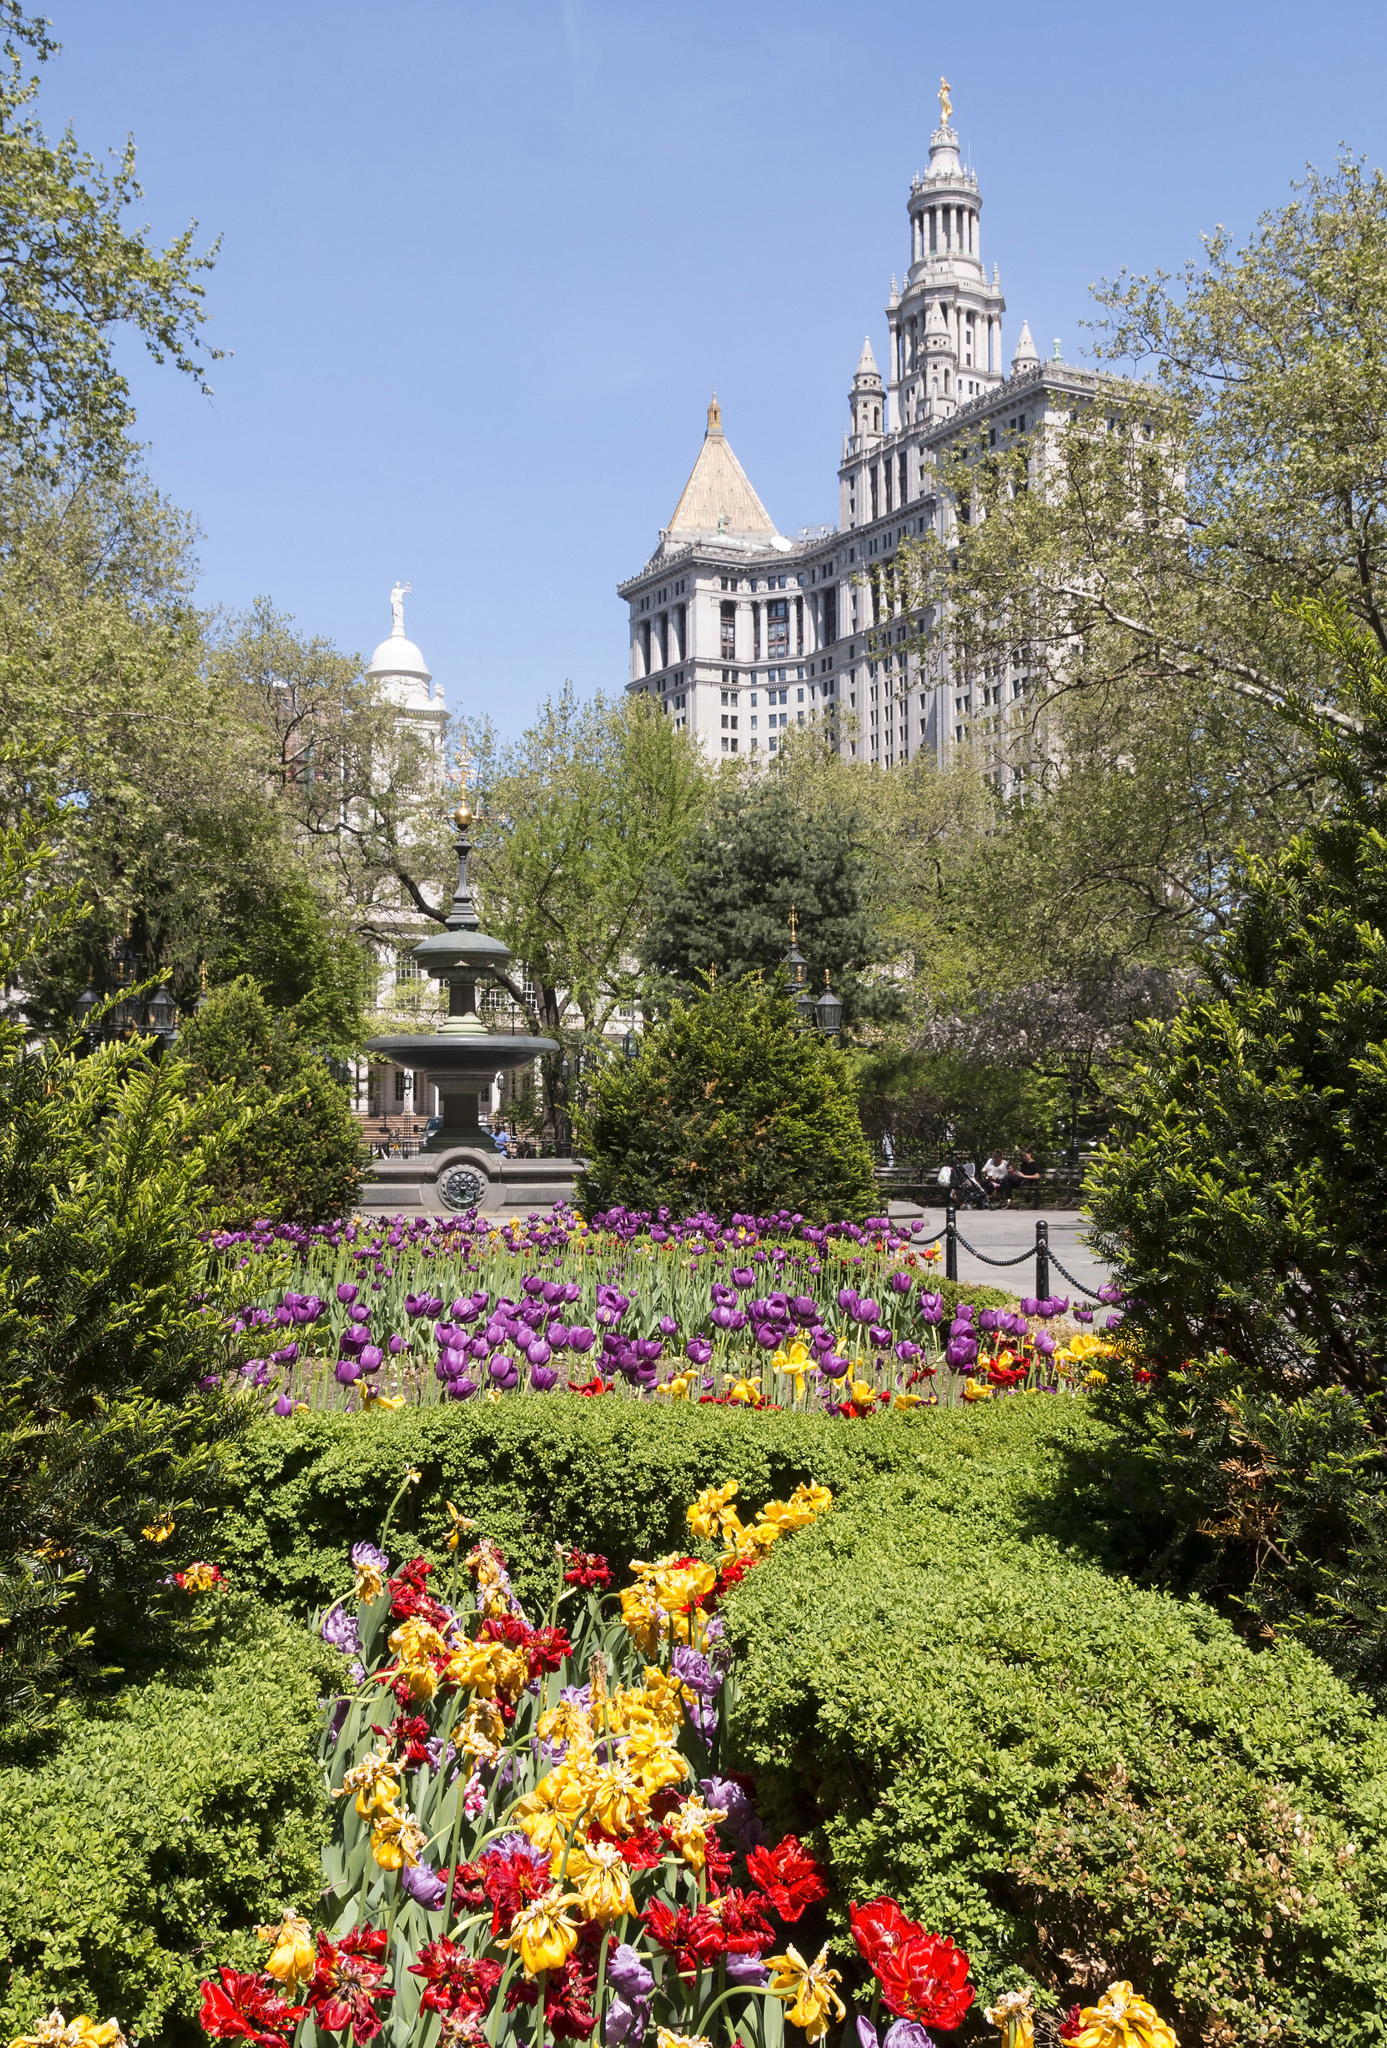 City Hall Park is a peaceful spot next to City Hall and the Municipal Building - photo 6